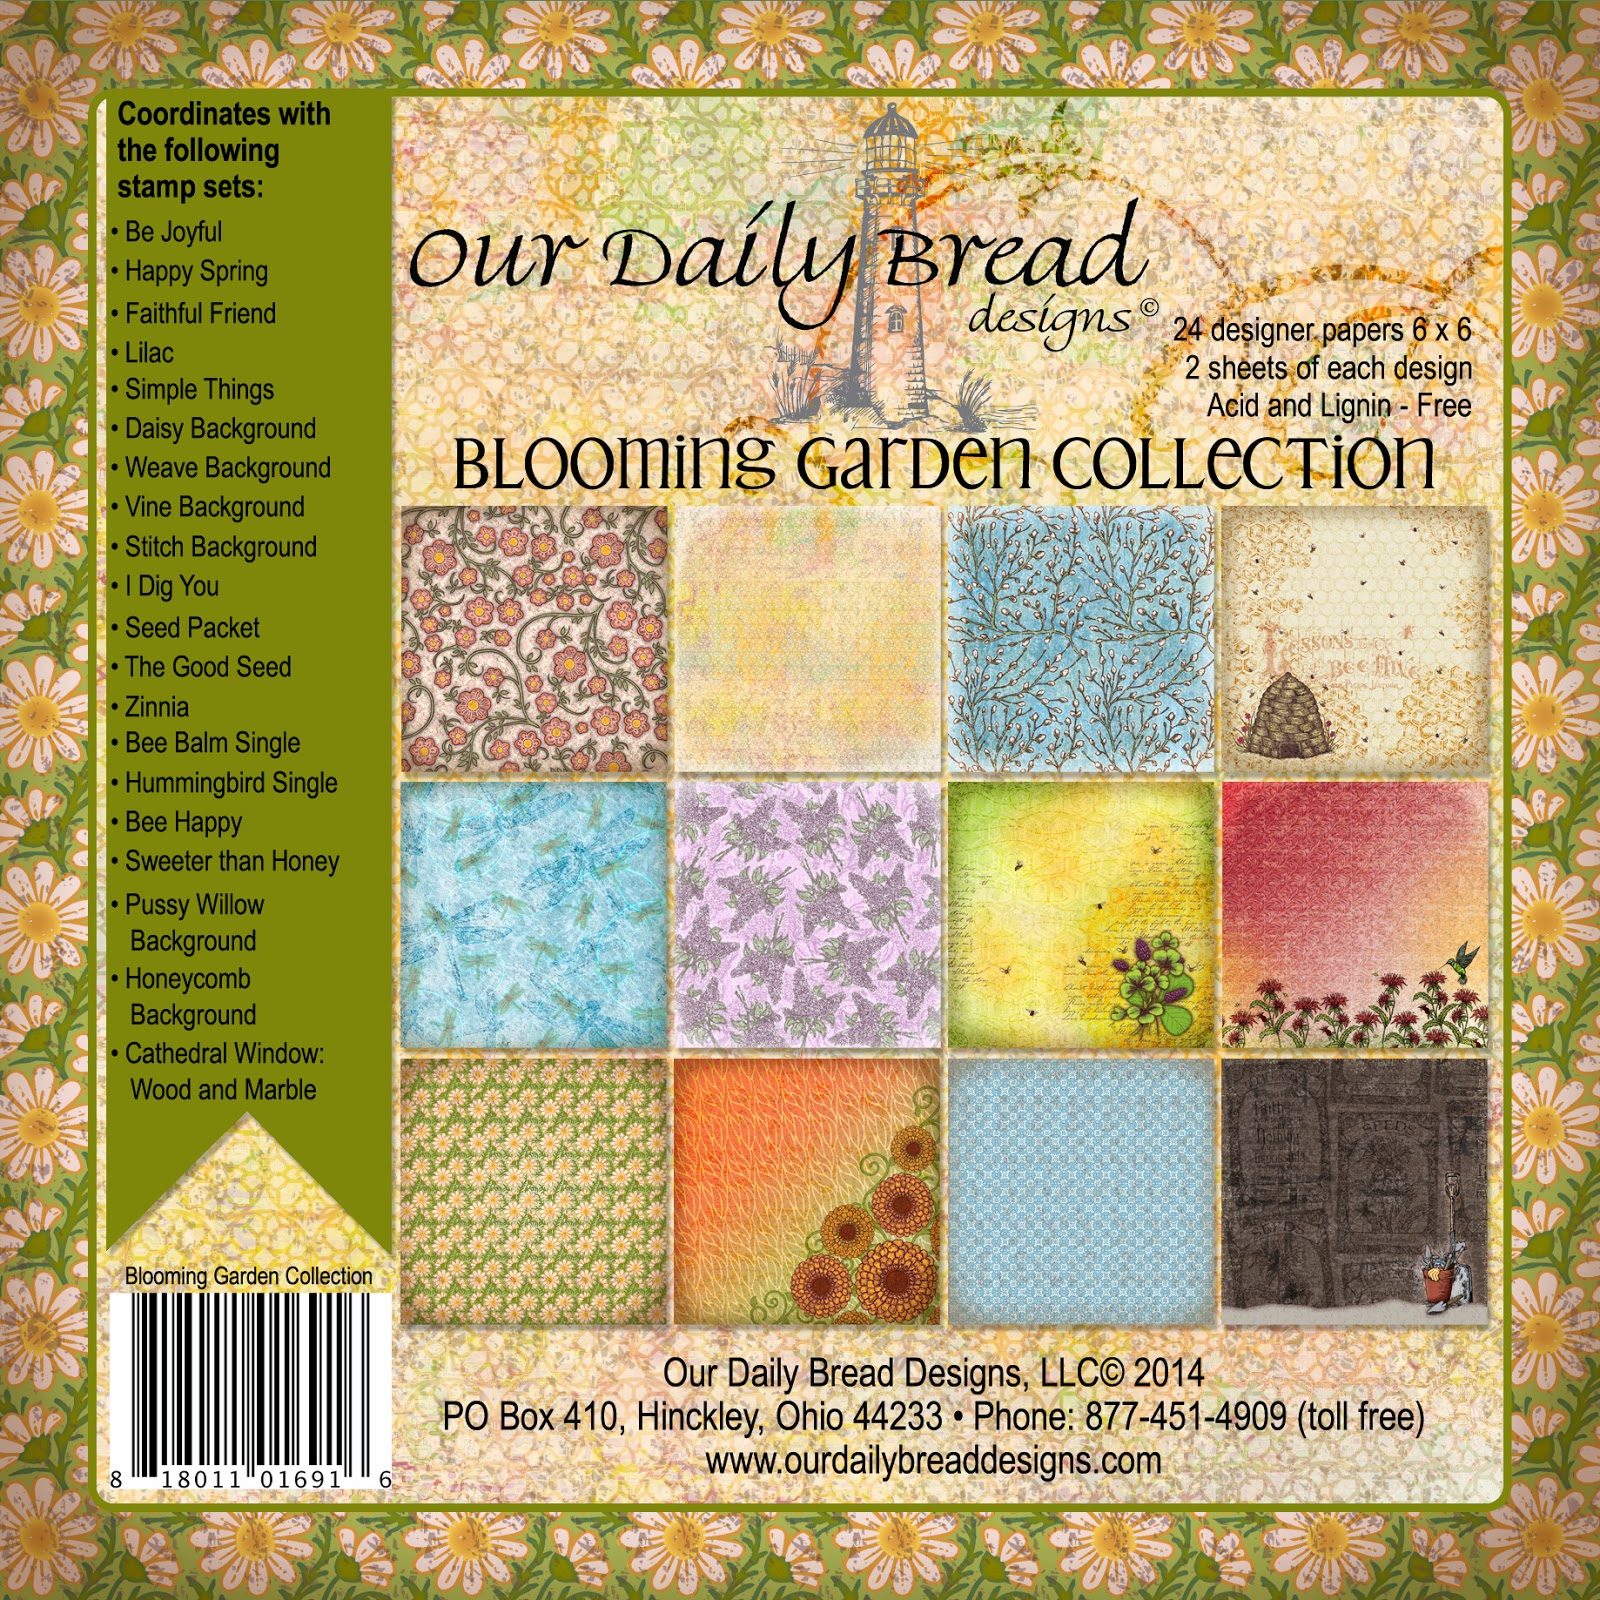 http://www.ourdailybreaddesigns.com/index.php/blooming-garden-collection-6x6-paper-pad.html